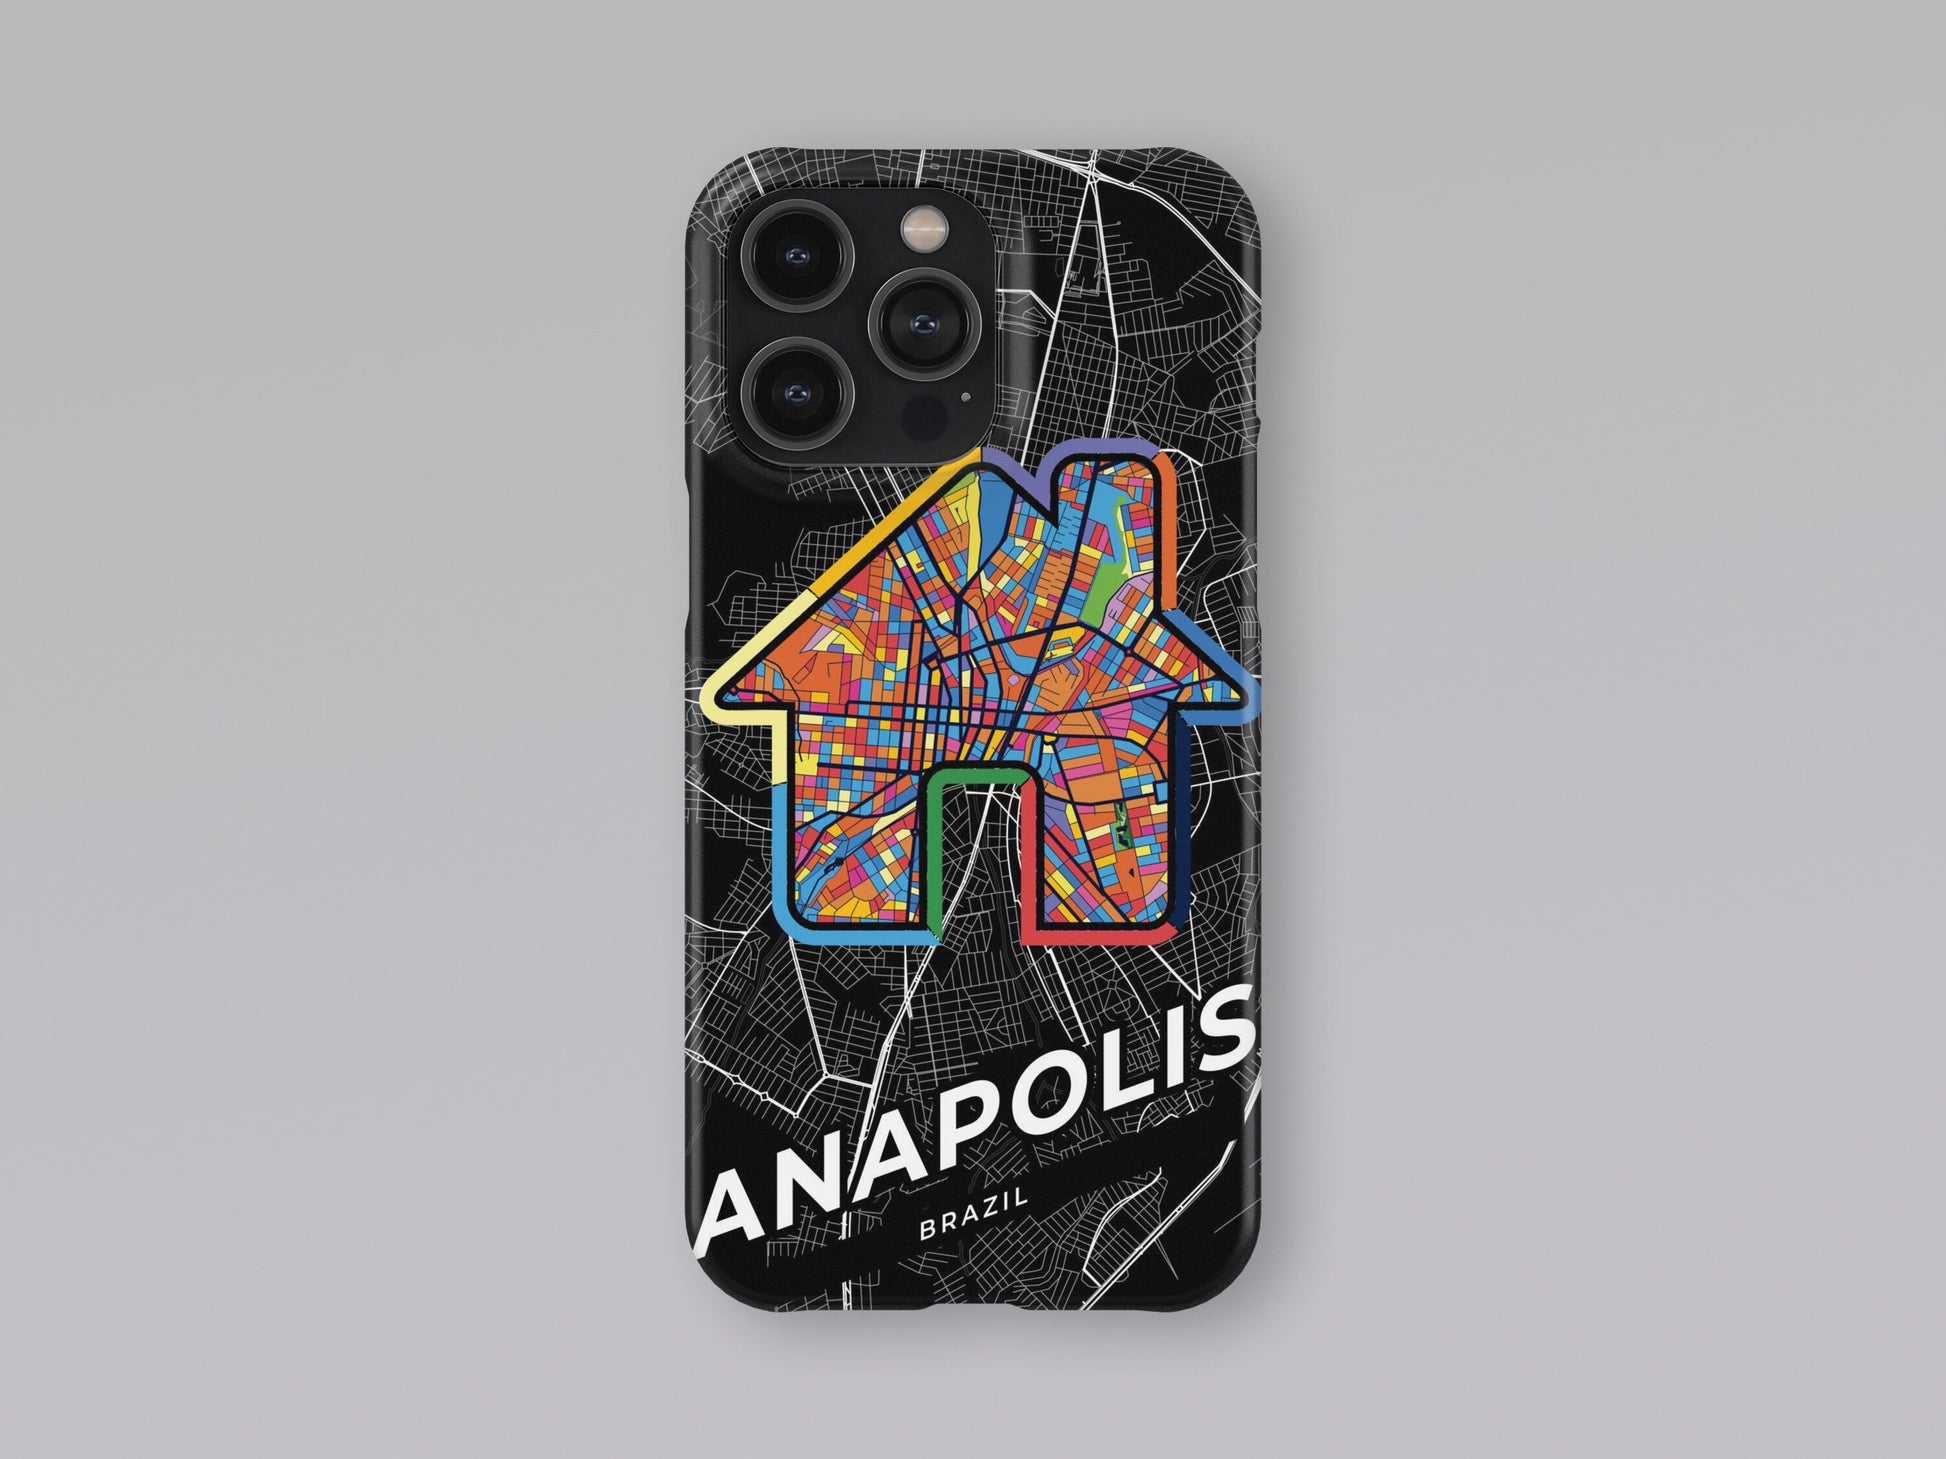 Anapolis Brazil slim phone case with colorful icon. Birthday, wedding or housewarming gift. Couple match cases. 3